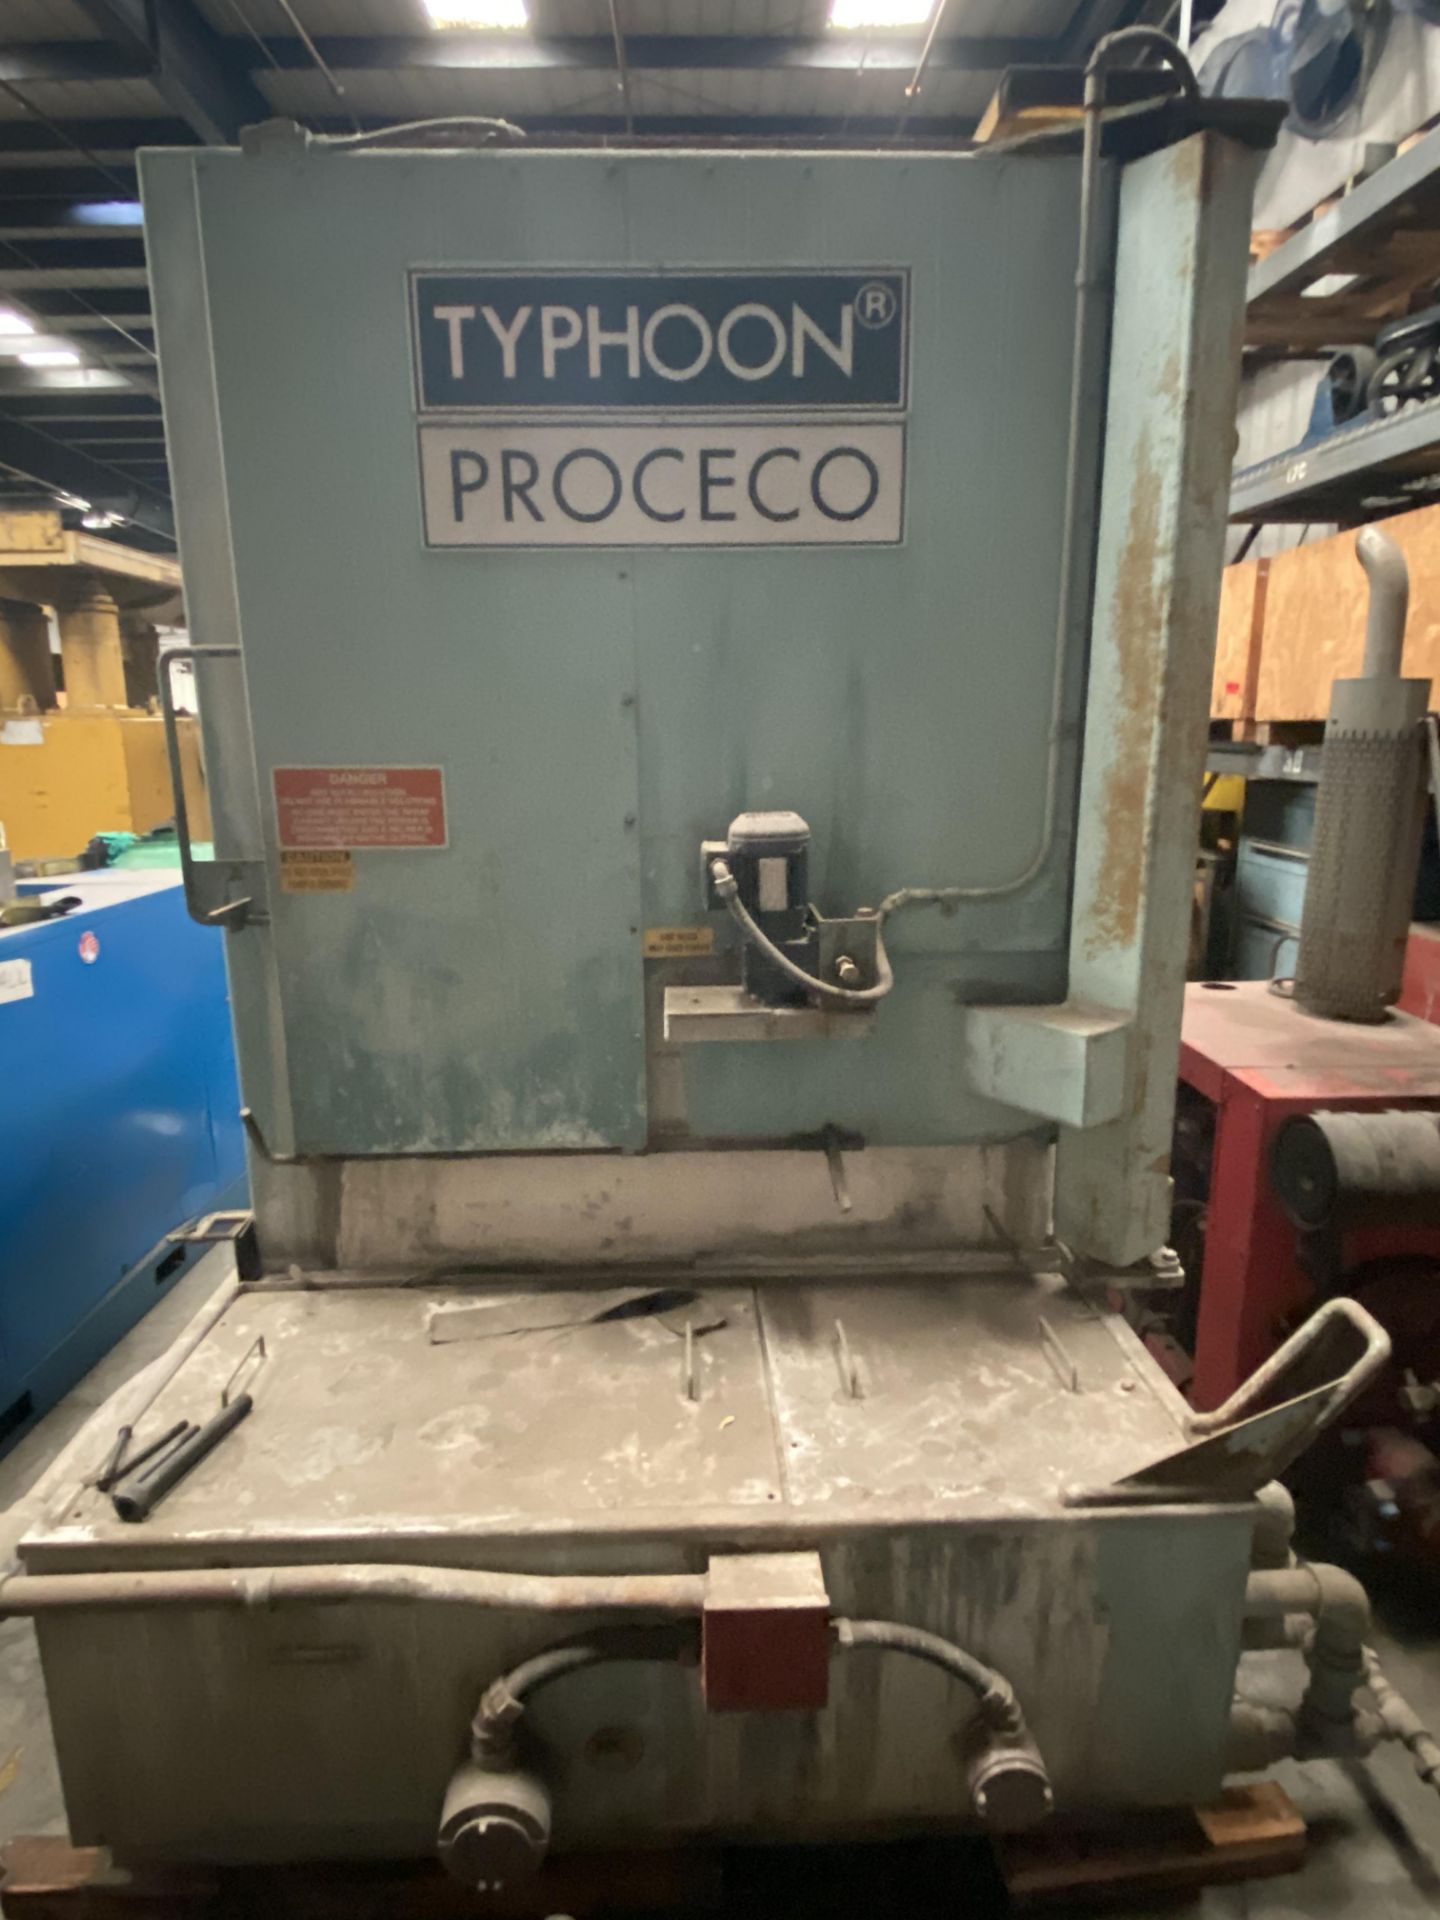 PROCECO INDUSTRIAL PARTS WASHER, MODEL TYPHOON HD, S/N 93-220 - Image 7 of 11